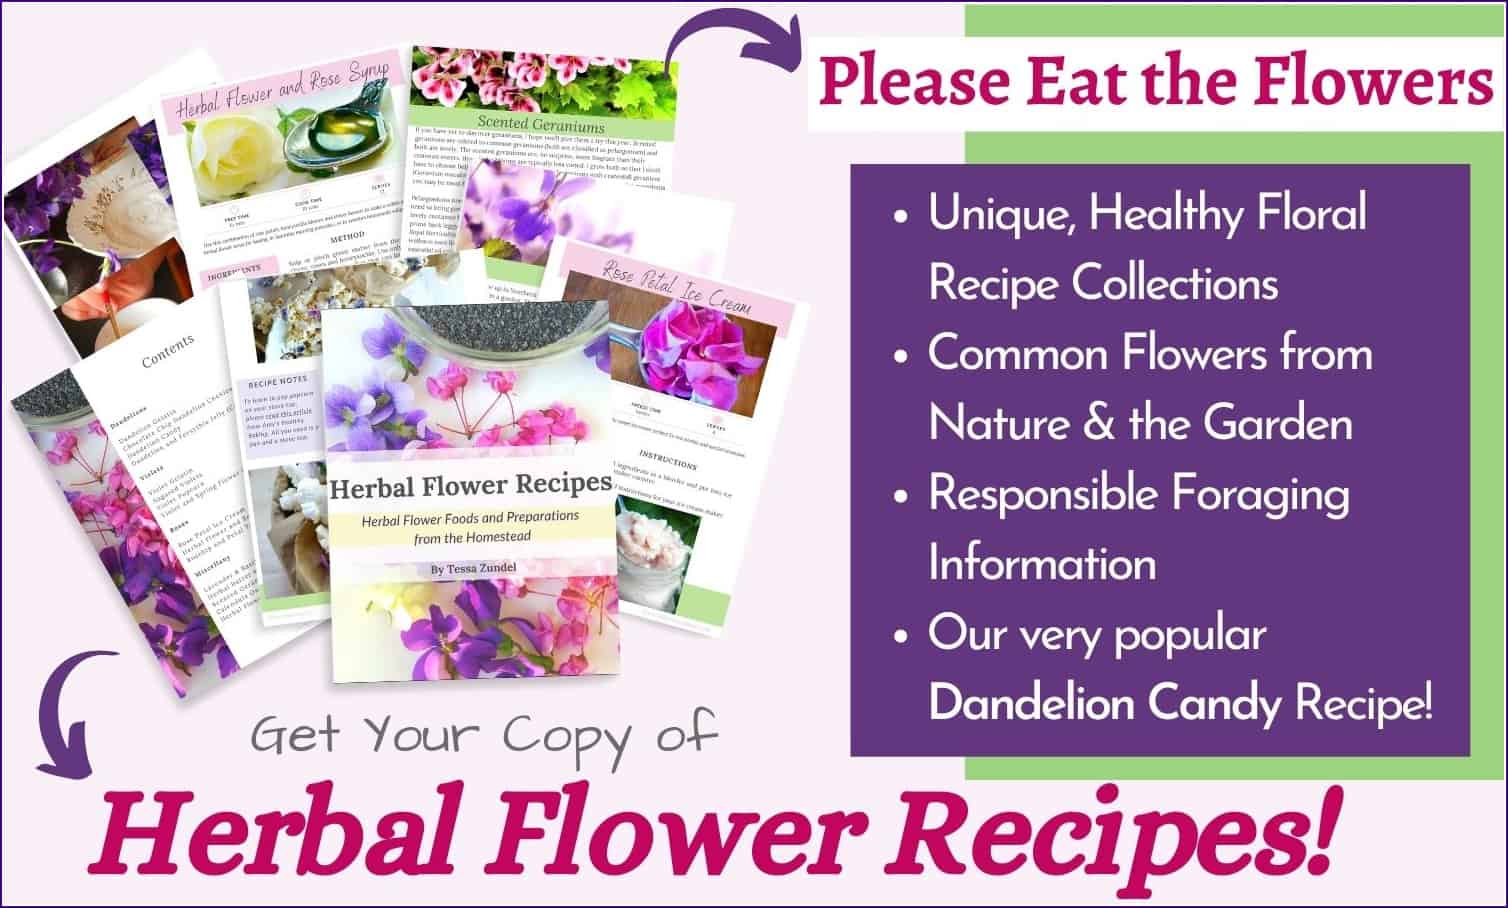 Herbal Flower Recipes ad